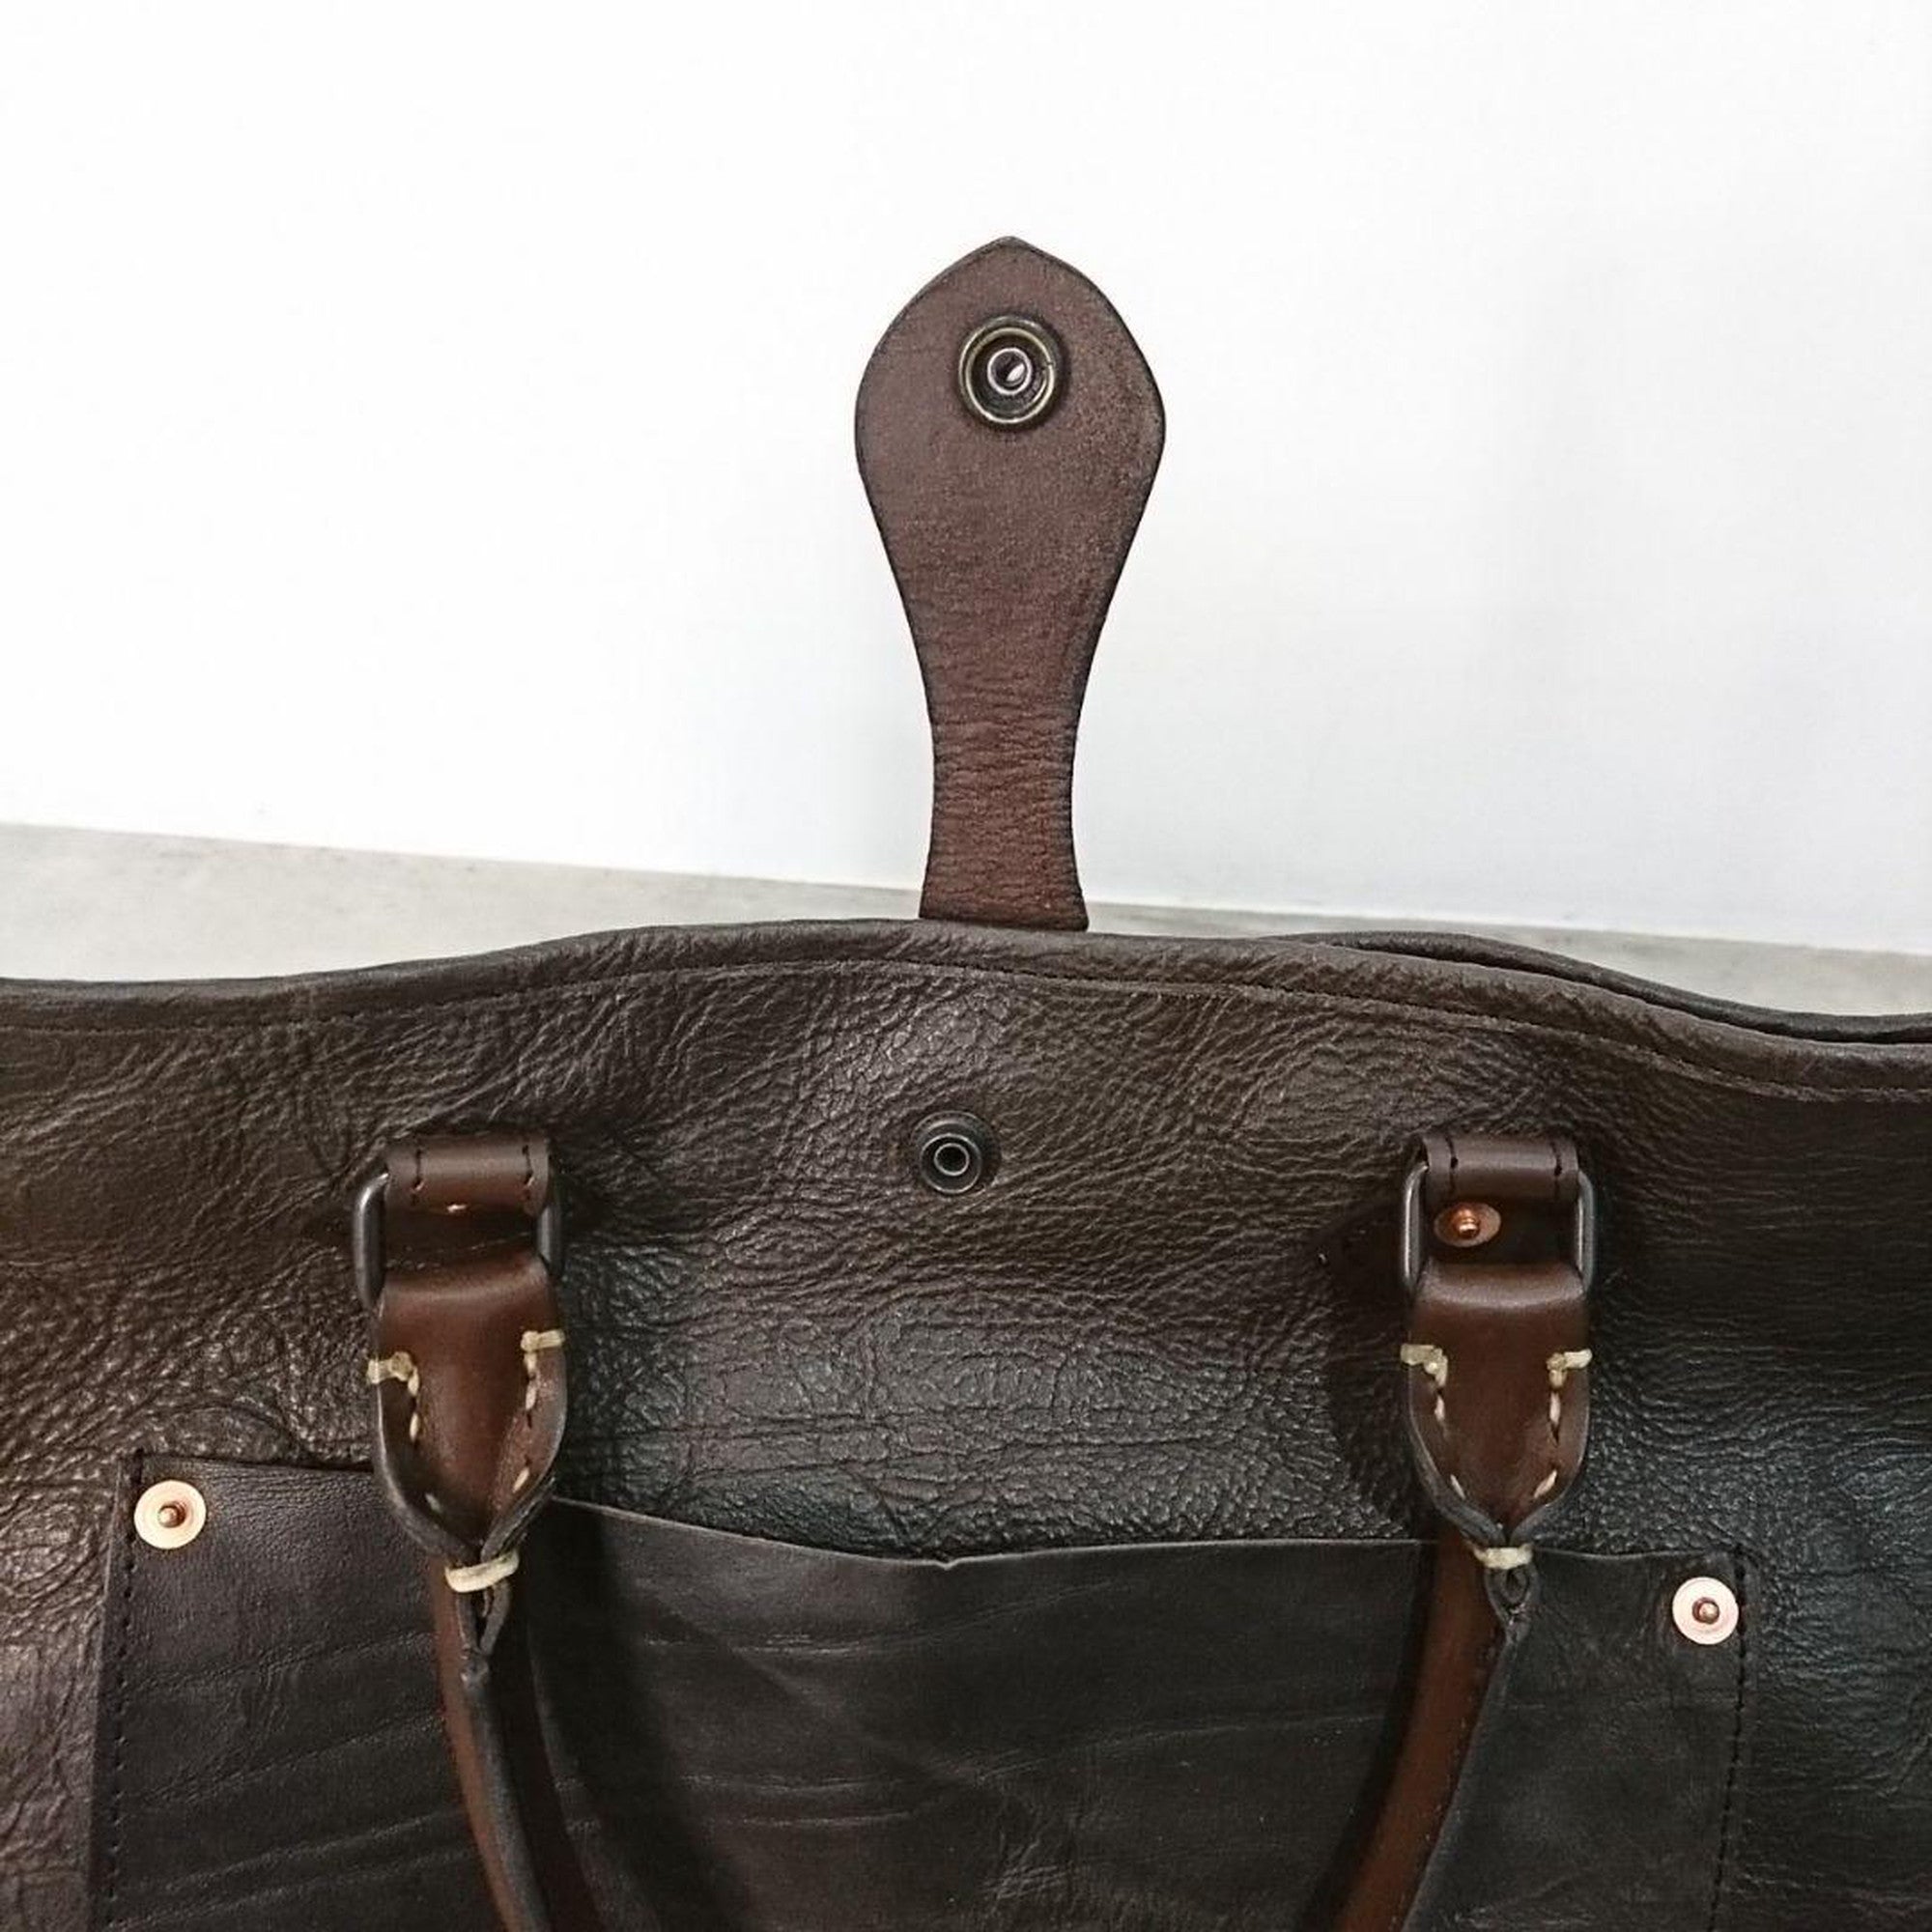 Handmade Old Leather Bag Made in Japan